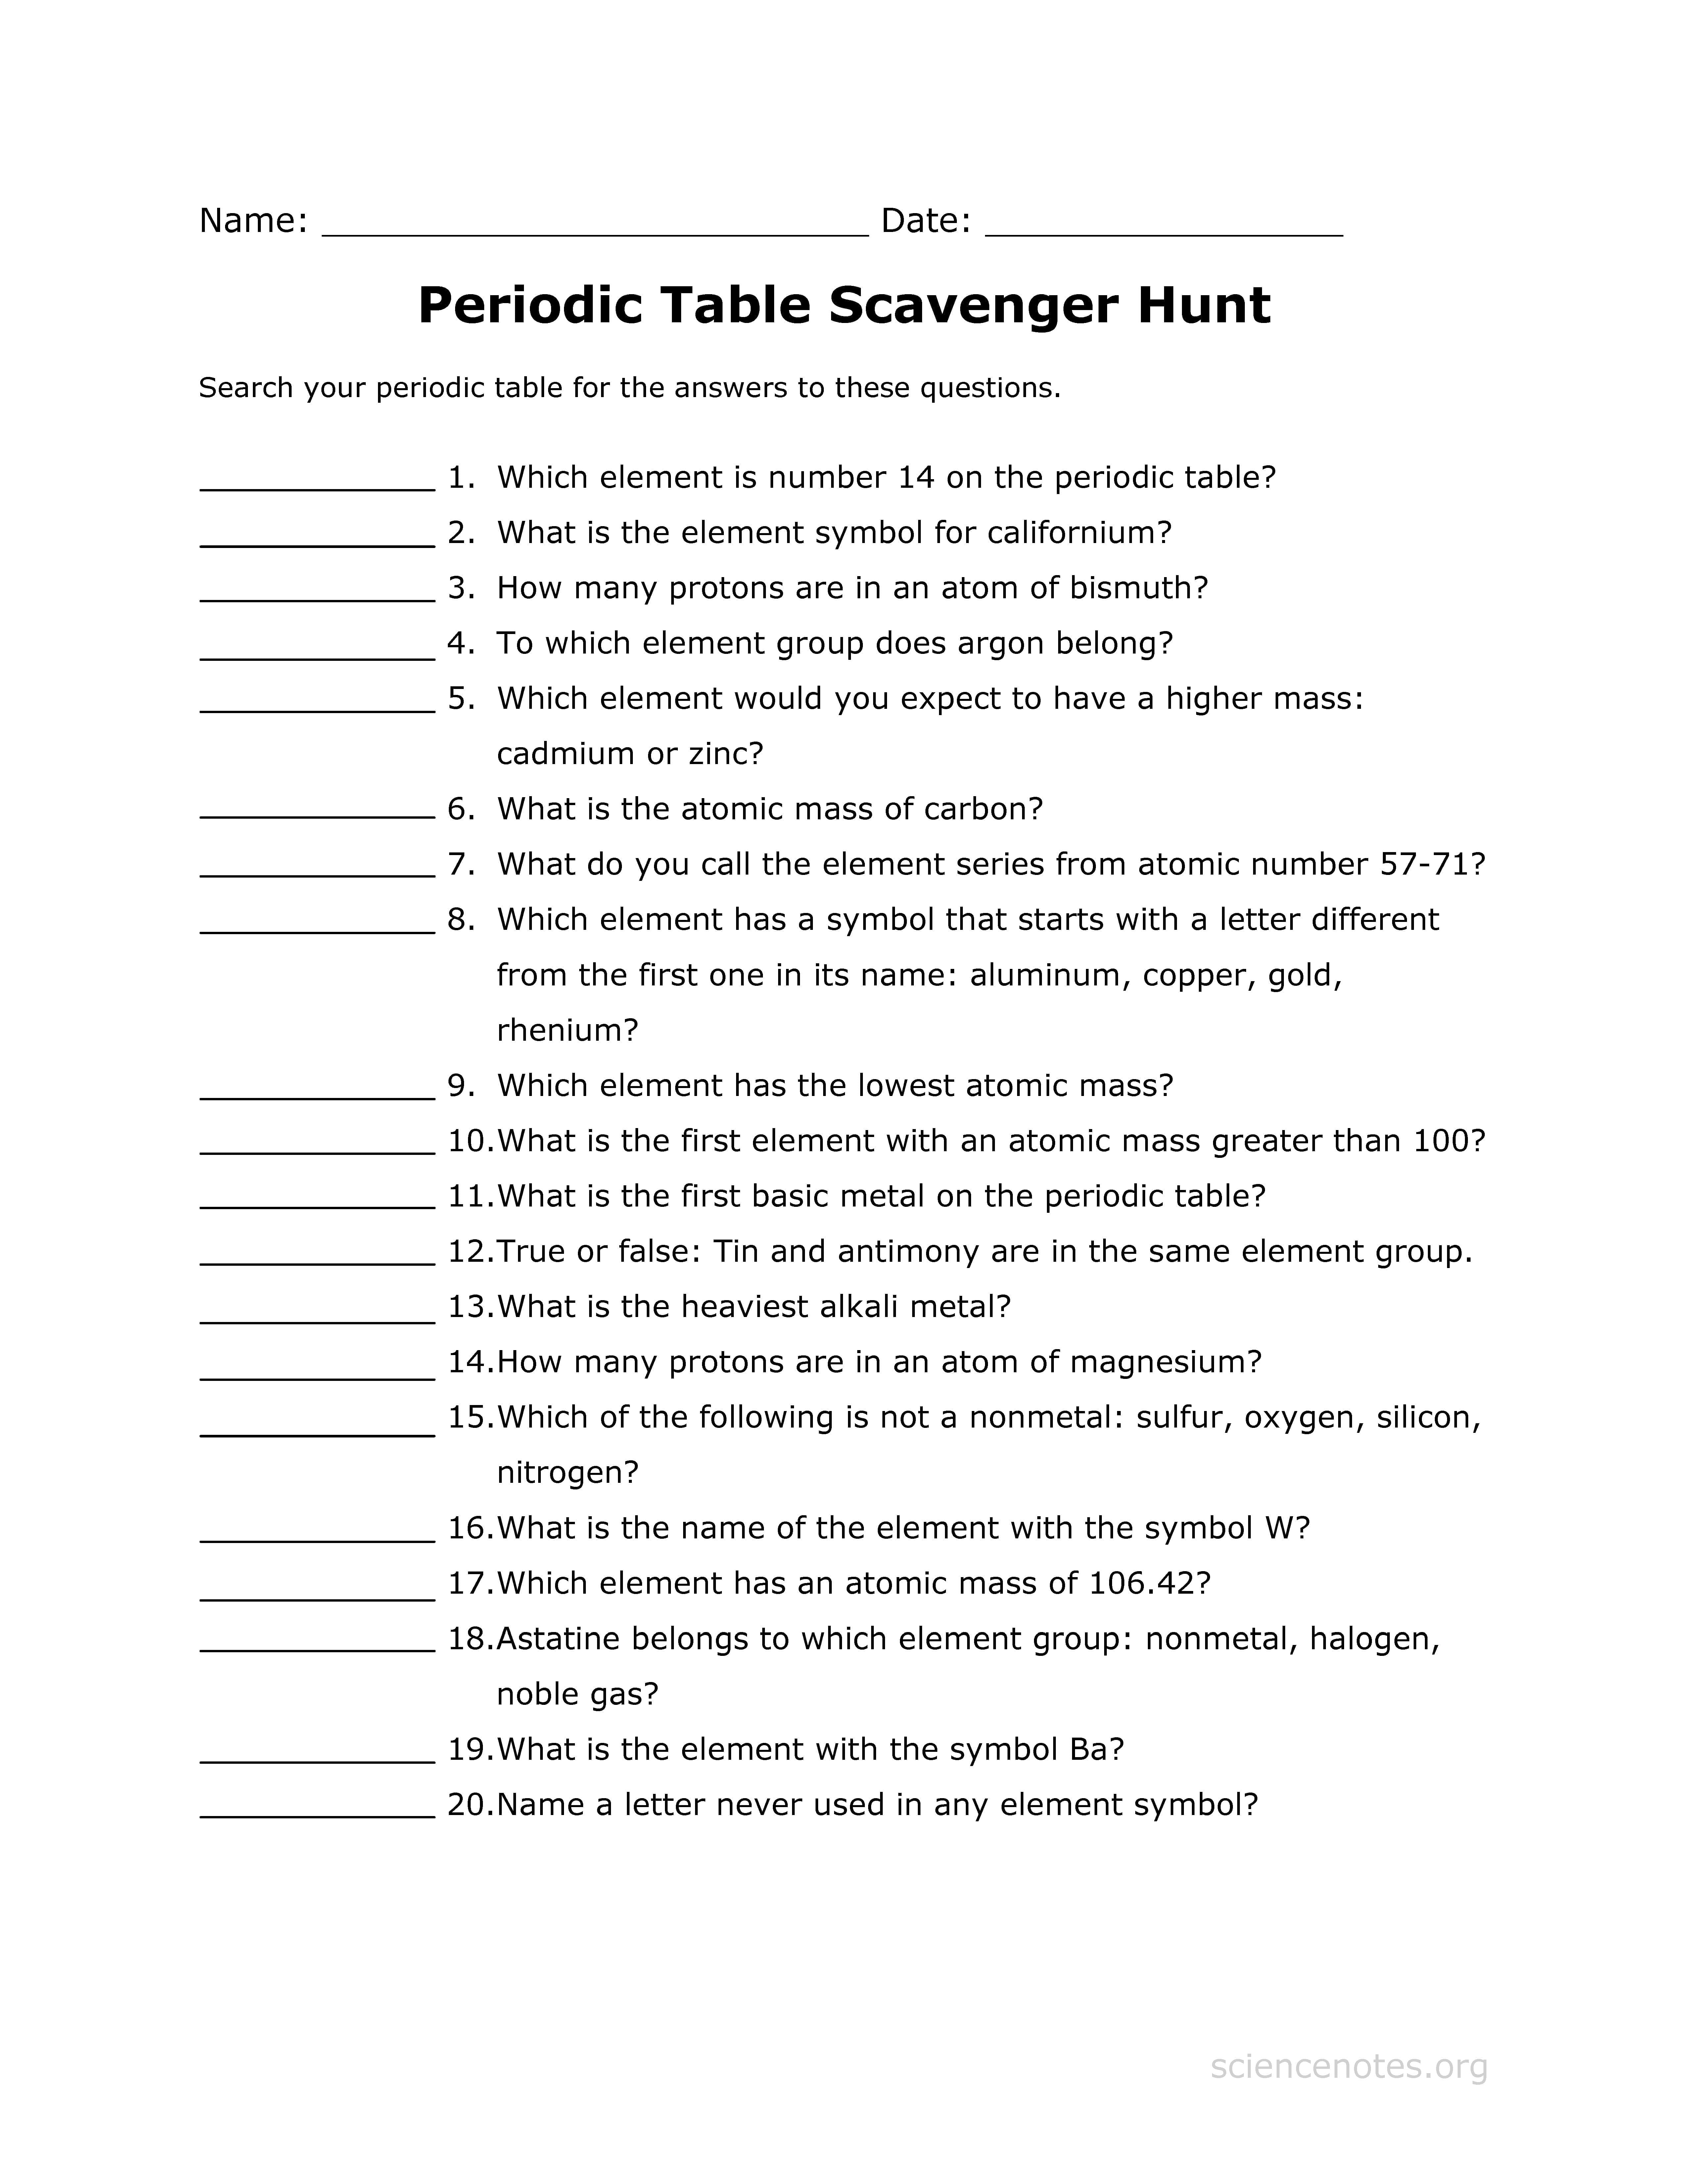 Periodic Table Scavenger Hunt Worksheet Within Element Scavenger Hunt Worksheet Answer Key